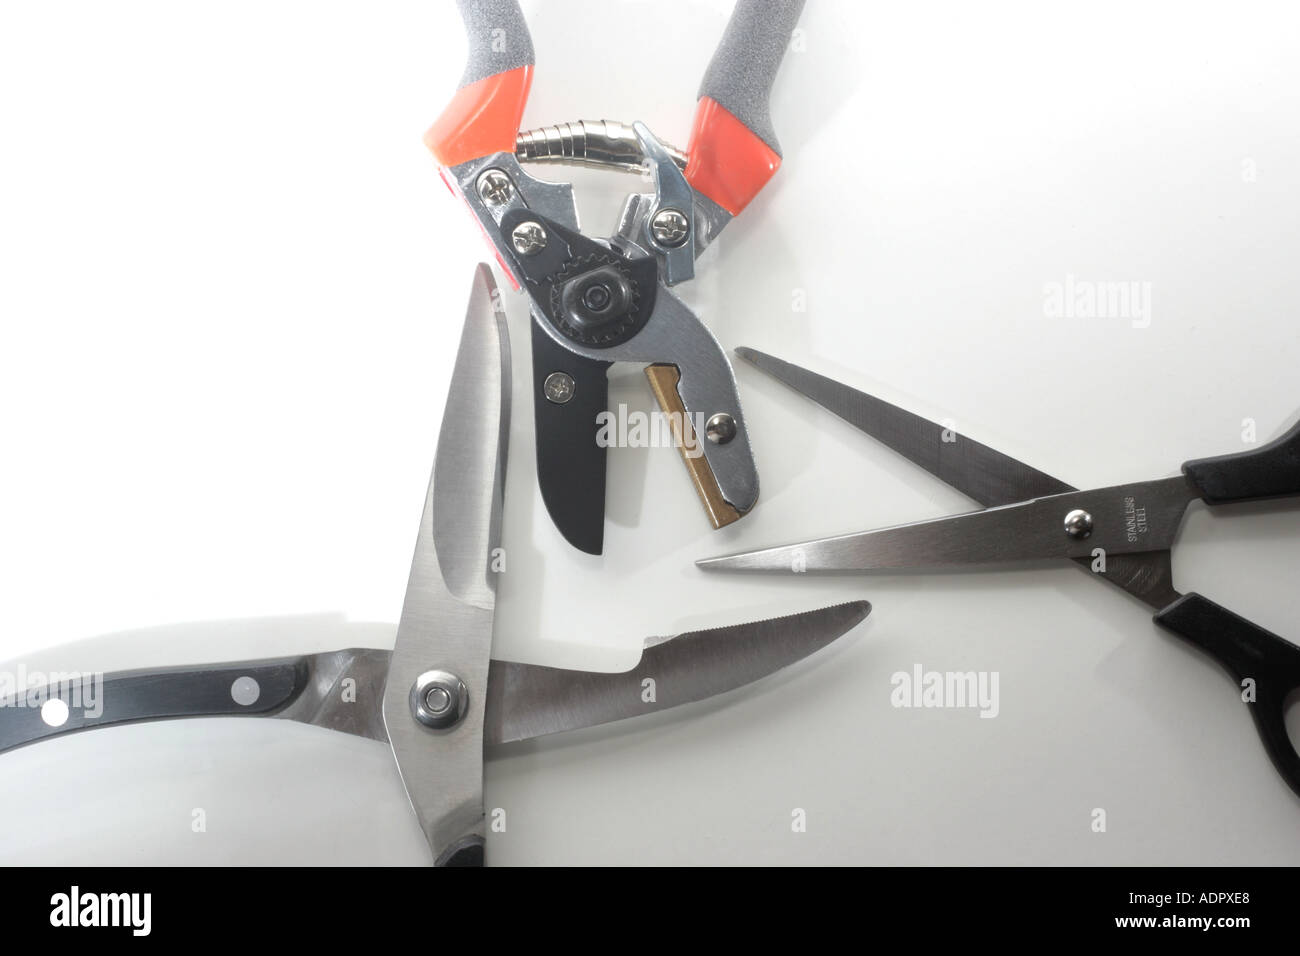 https://c8.alamy.com/comp/ADPXE8/cutting-implements-scissors-game-shears-and-secateurs-ADPXE8.jpg